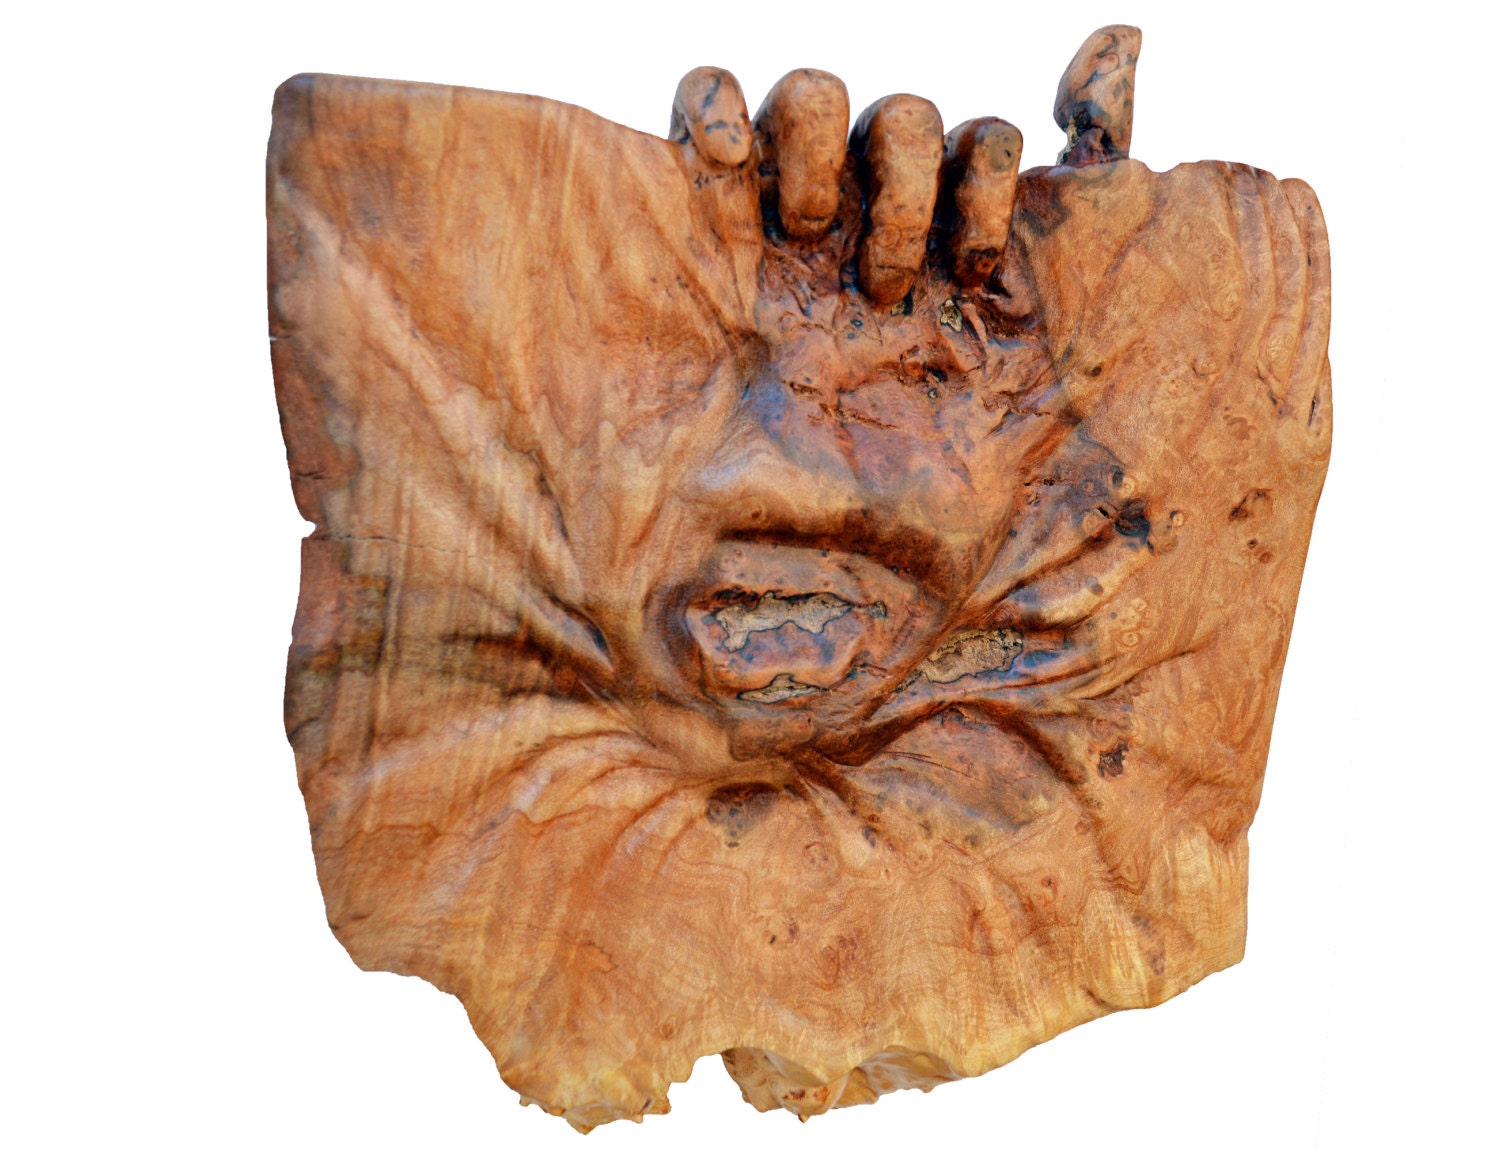 Fine Art Wood Sculpture A Perfect Wood Carving Gift OOAK